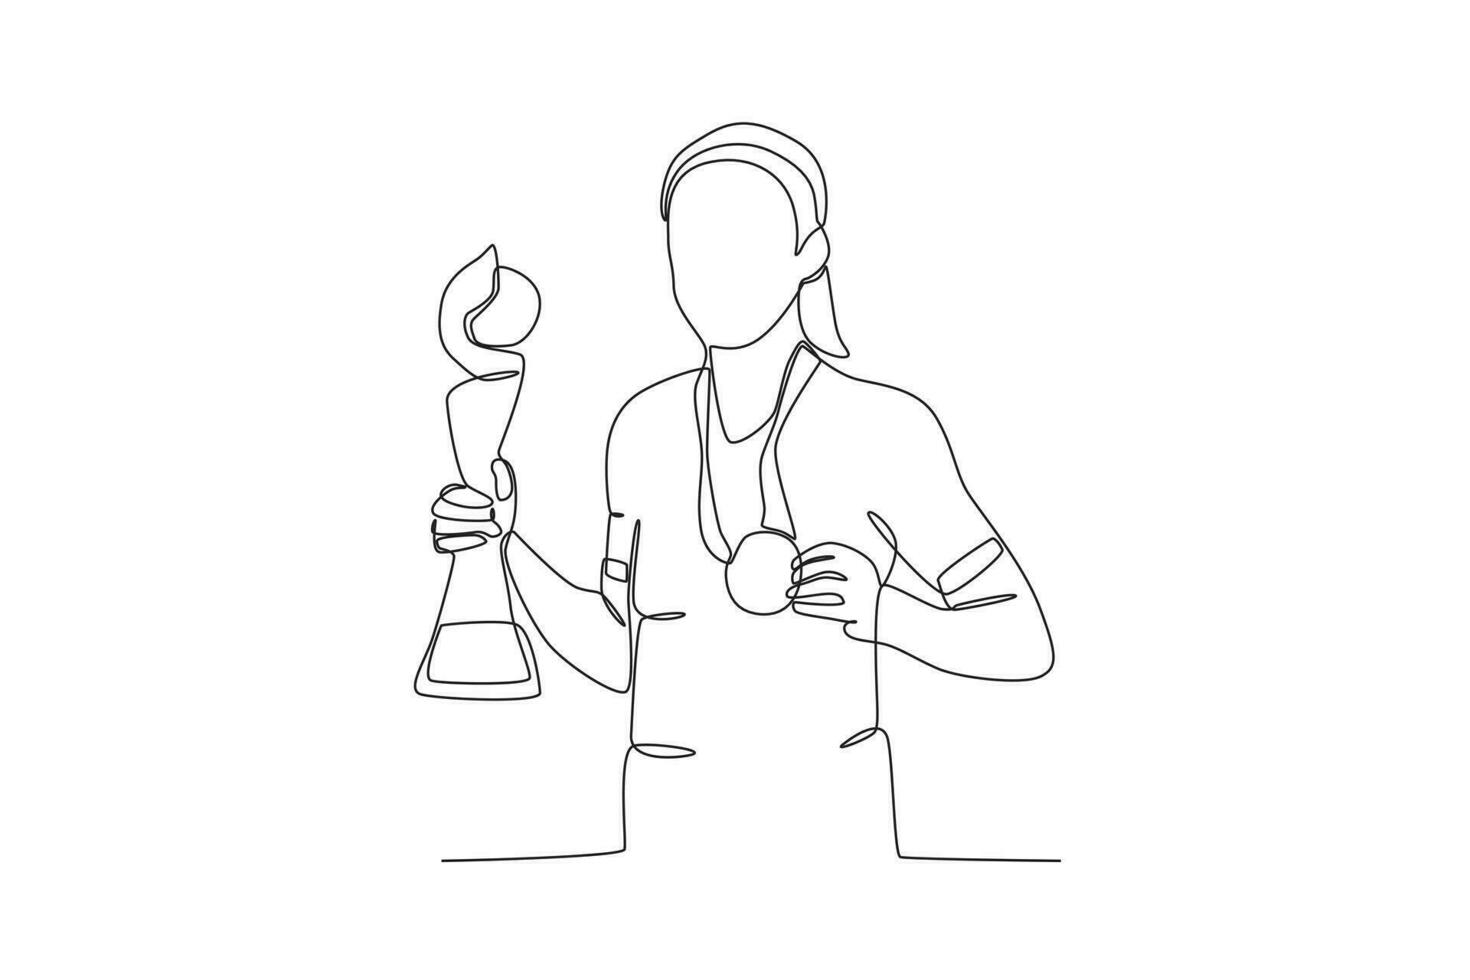 A female athlete holding a trophy and medal vector